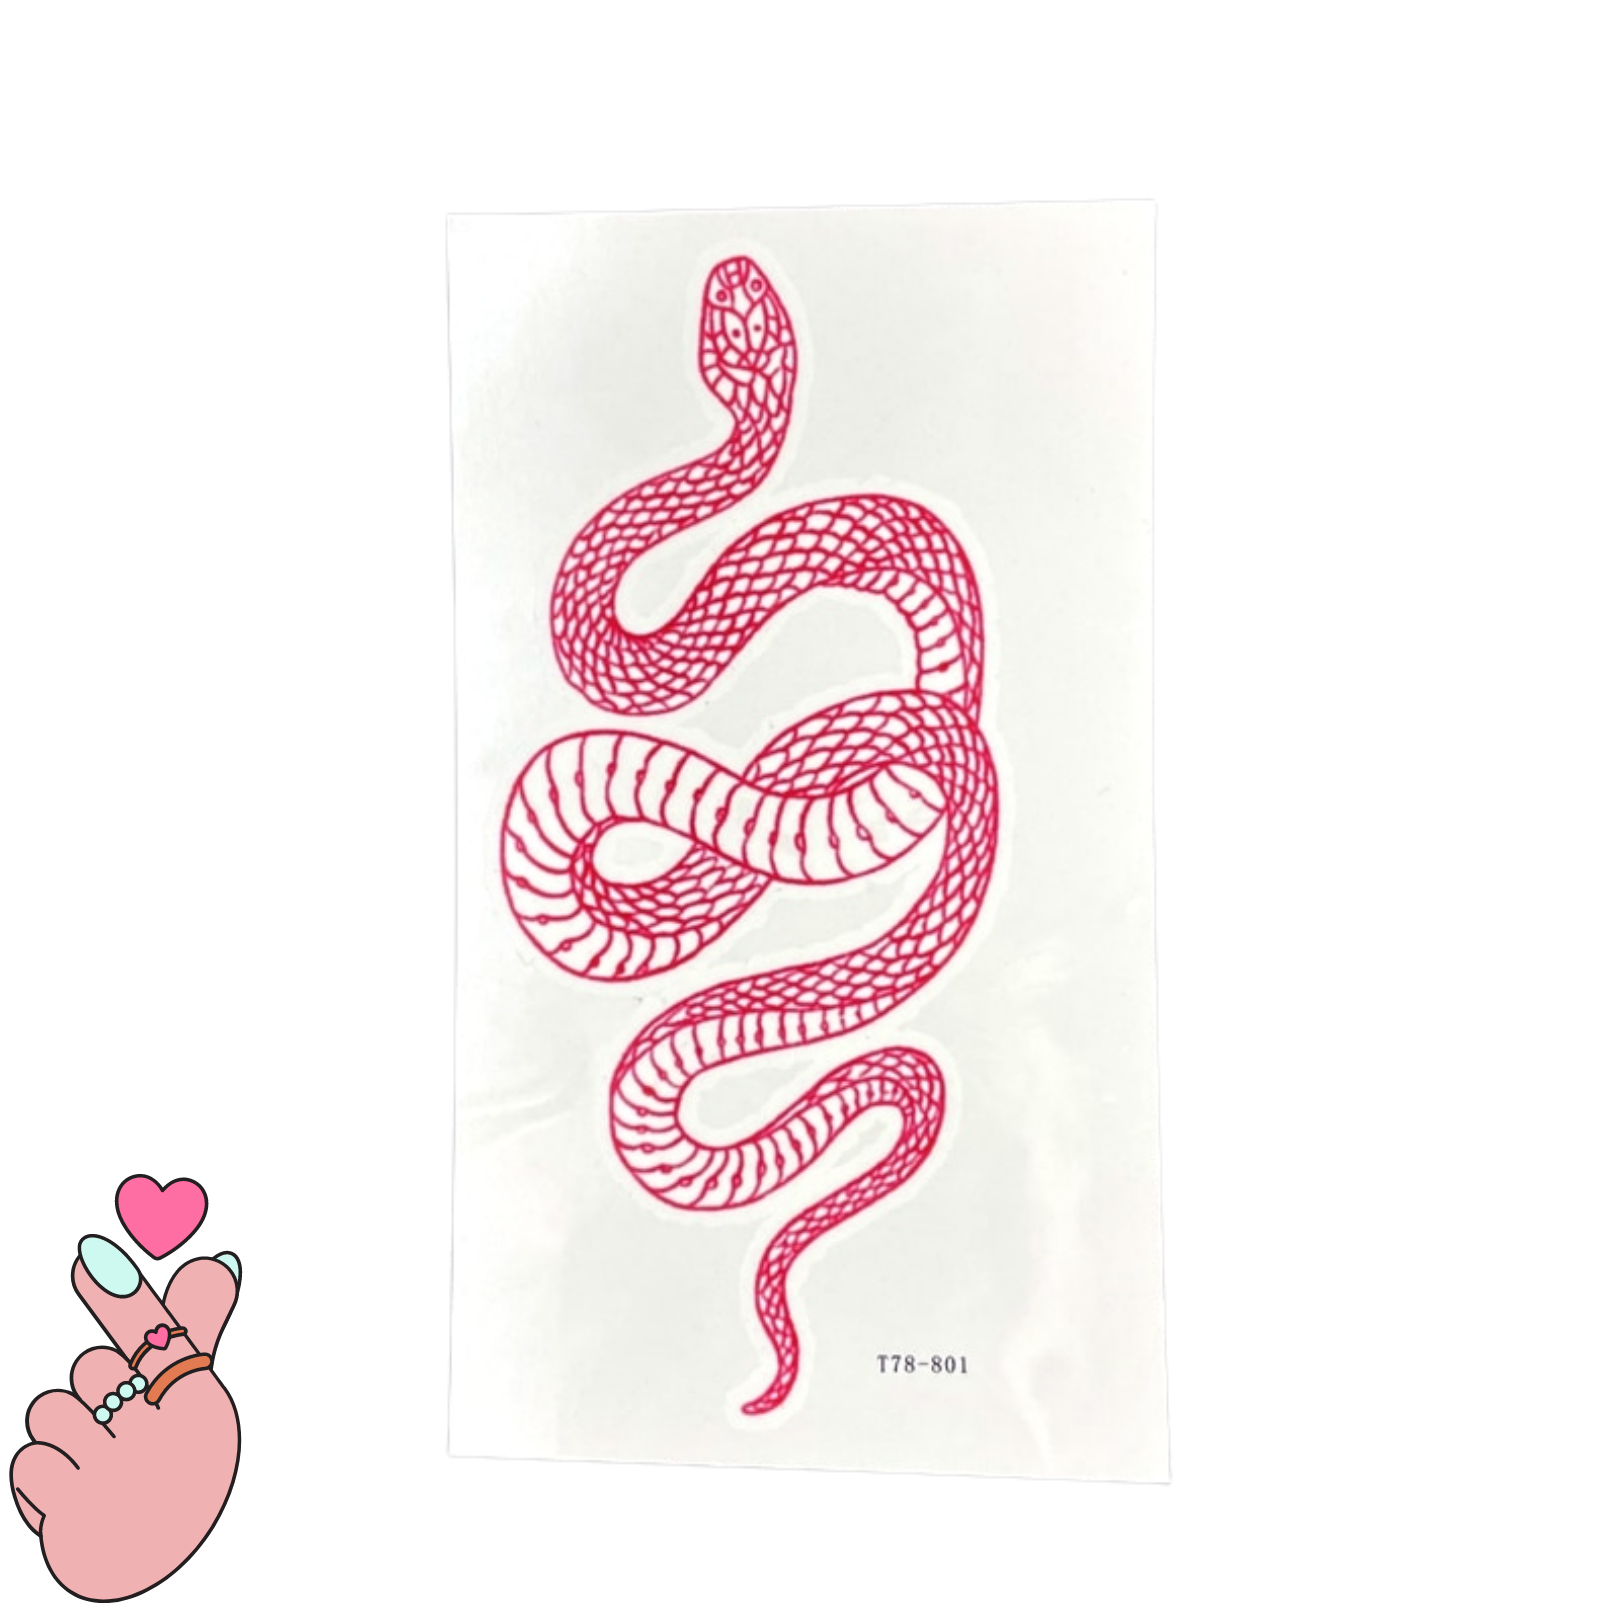 Big Size Red Snake Waterproof Temporary Tattoo Stickers For Women Men - 3 Sheets